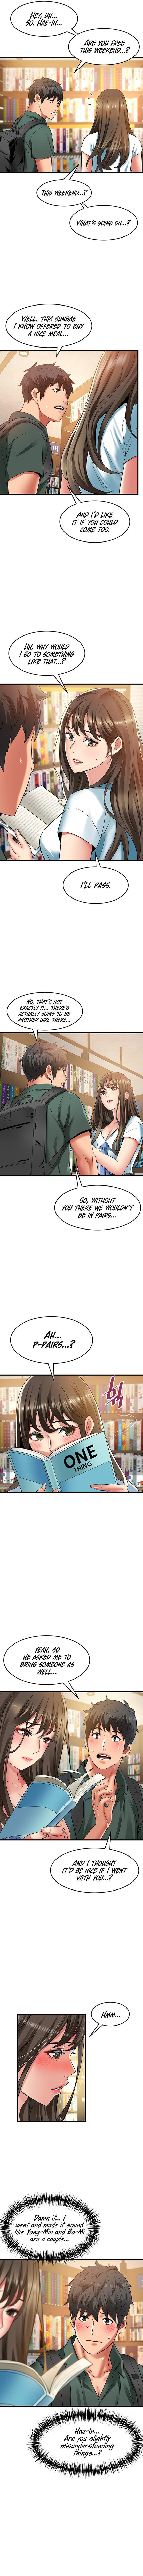 an-alley-story-chap-38-4